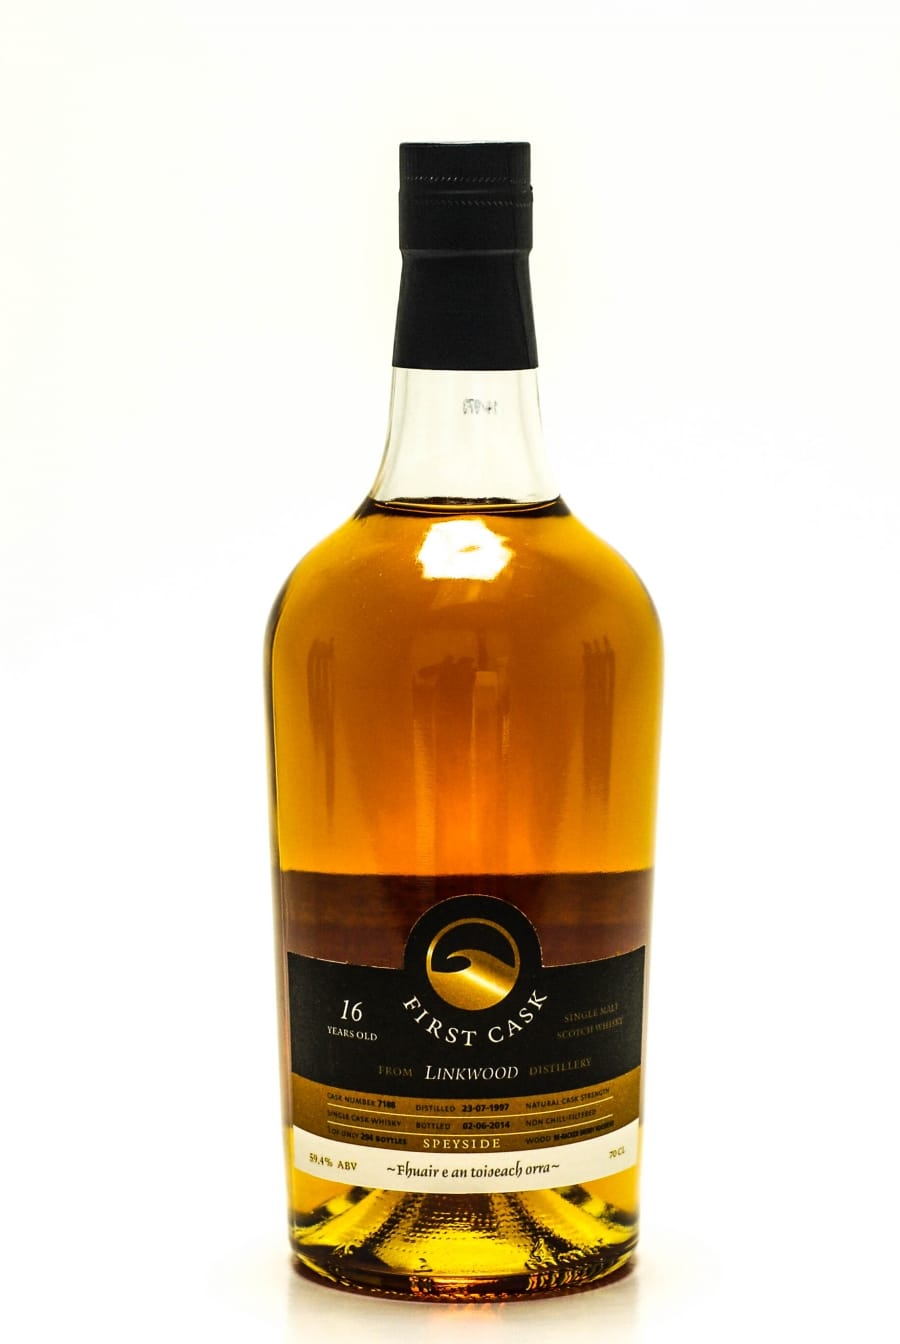 Linkwood - 16 years Old First Cask: 7188 1 Of 294 Bottles 59.4% 1997 Perfect